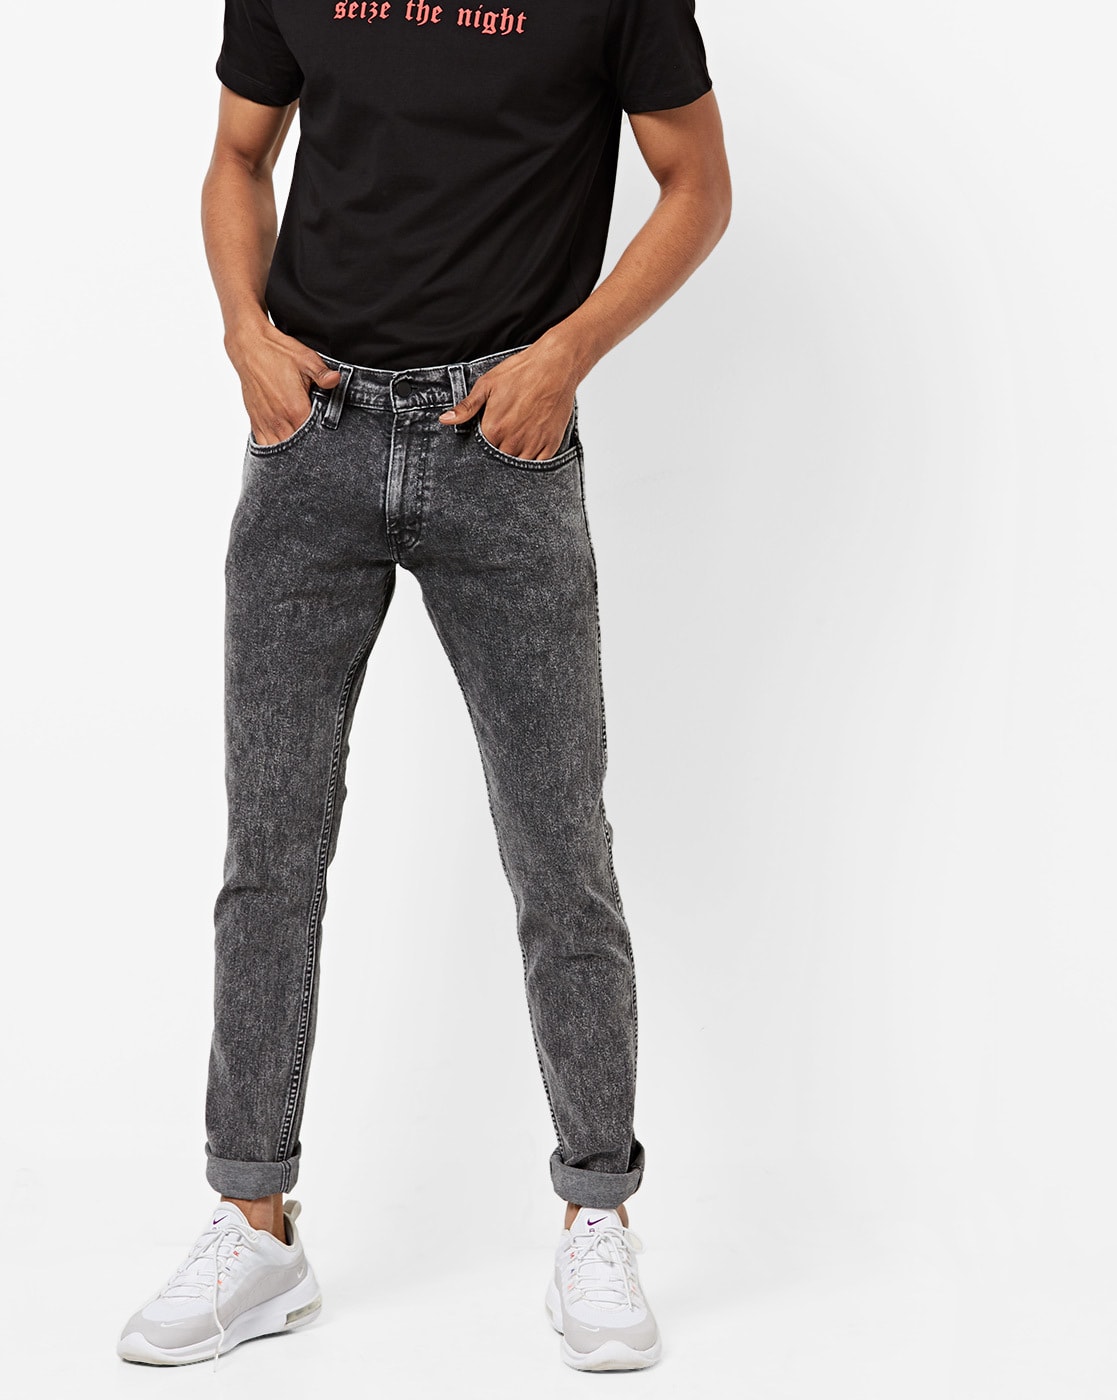 65504 skinny fit jeans